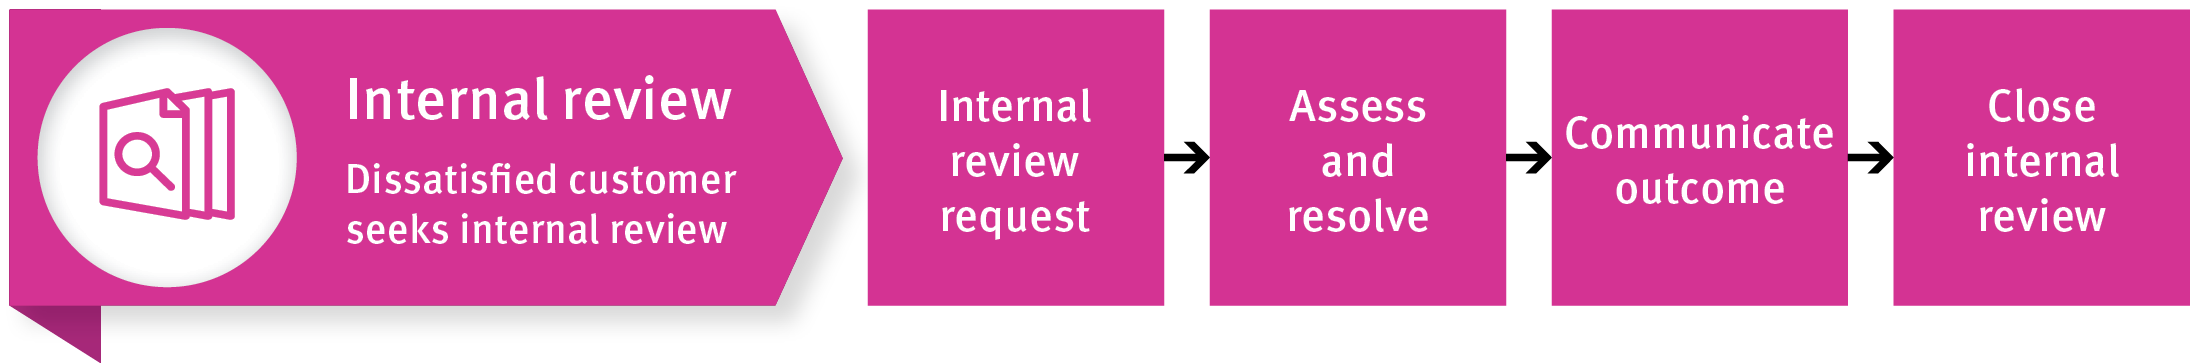 Image shows a flowchart of the Internal review process, starting with a dissatisfied customer seeks an internal review. 1 Internal review request 2 Assess and resolve 3 Communicate outcome 4 Close internal review 